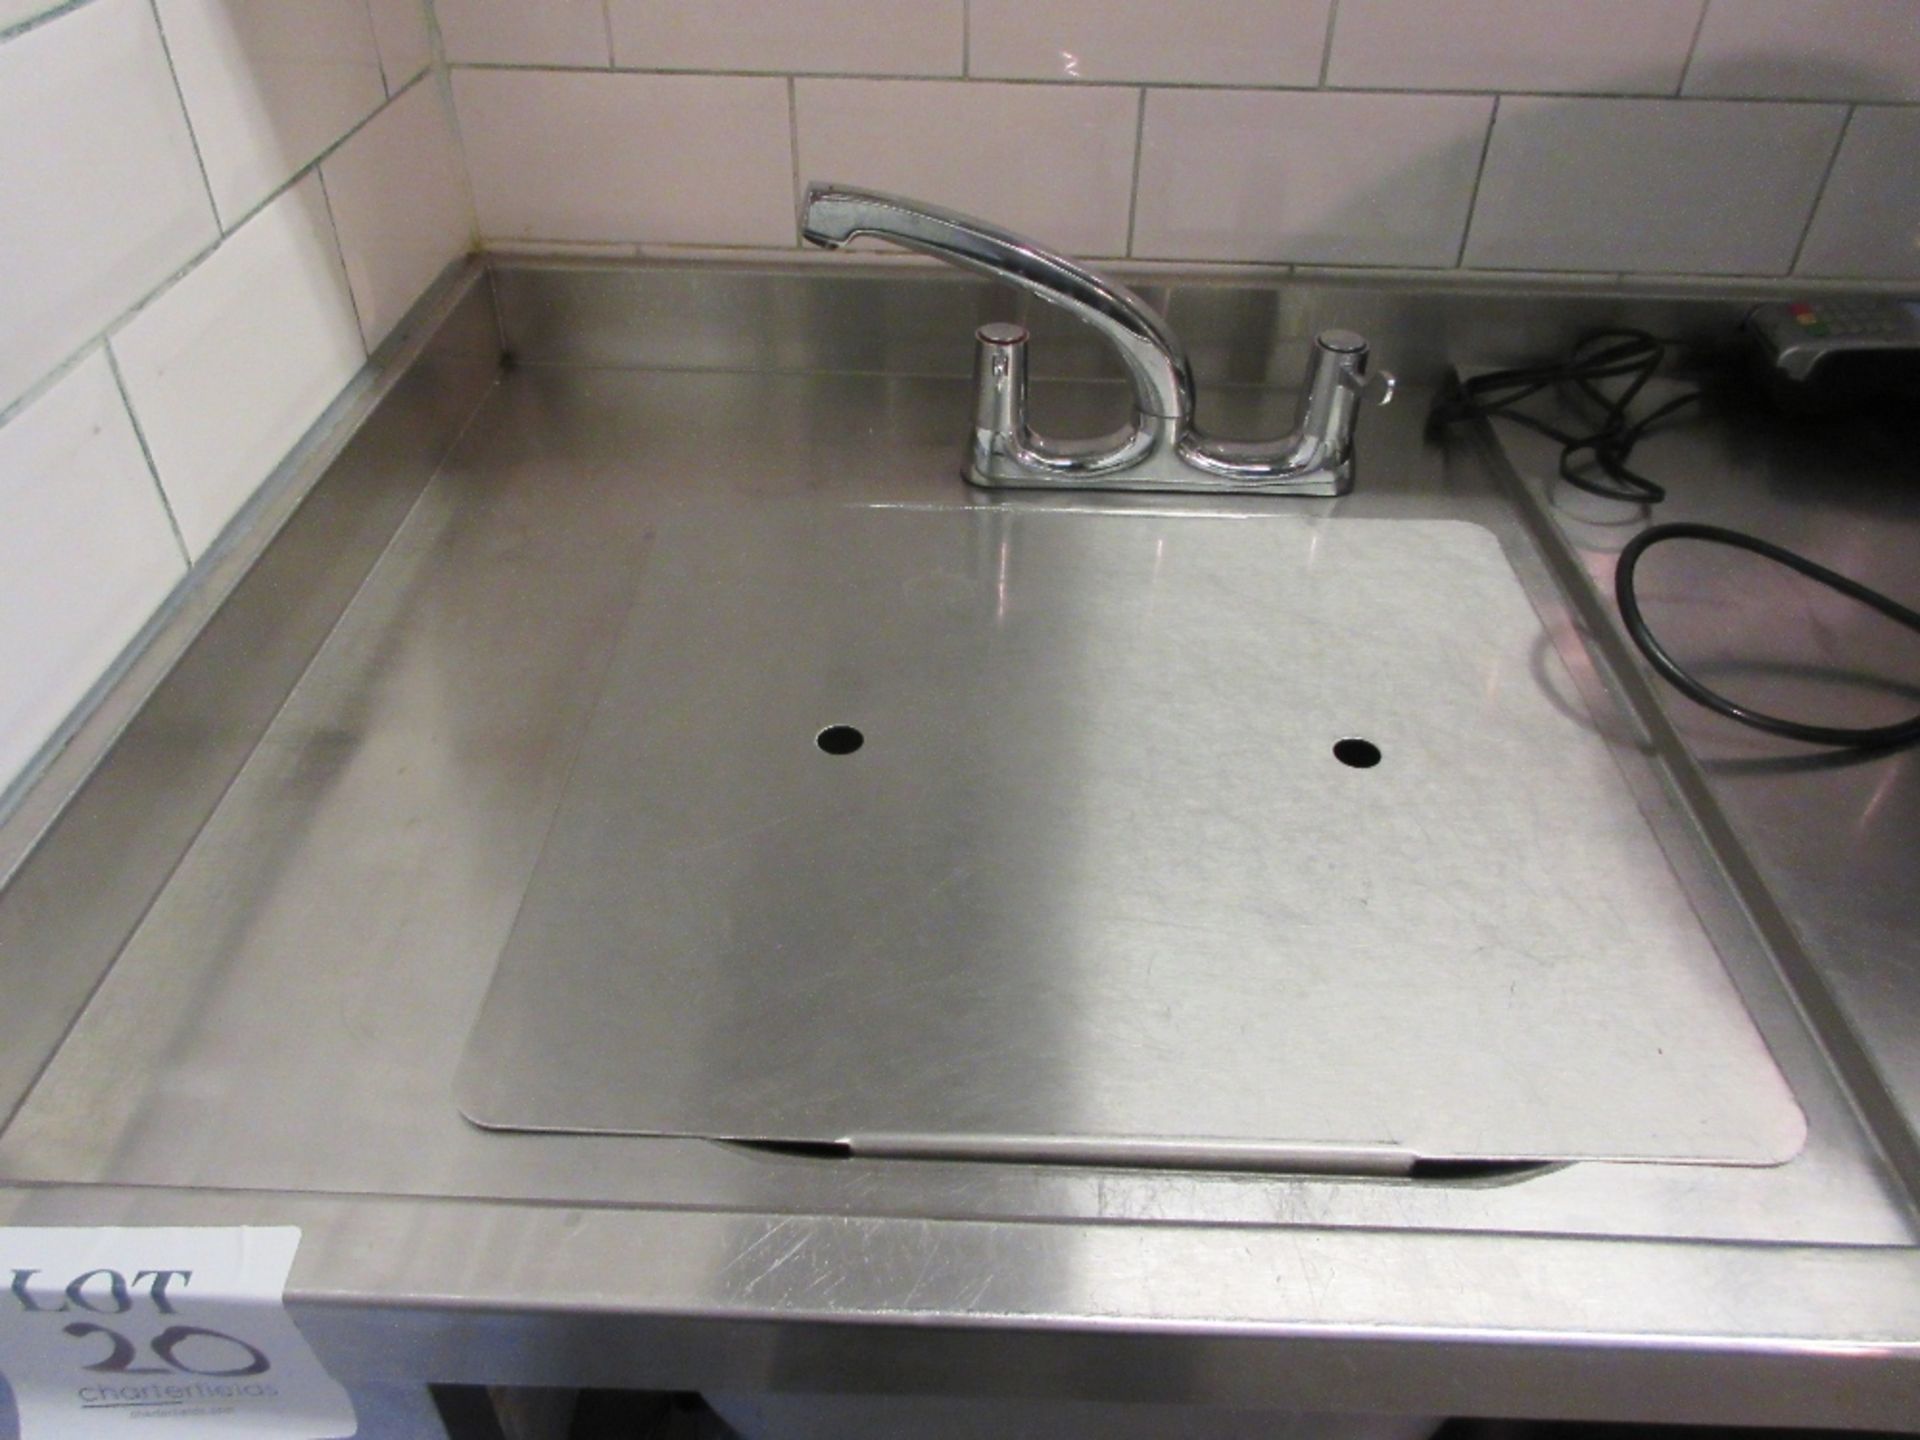 Stainless steel single bowl basin incorporating mixer tap, worktop 227cm x 66cm approx, with shelf - Image 3 of 4